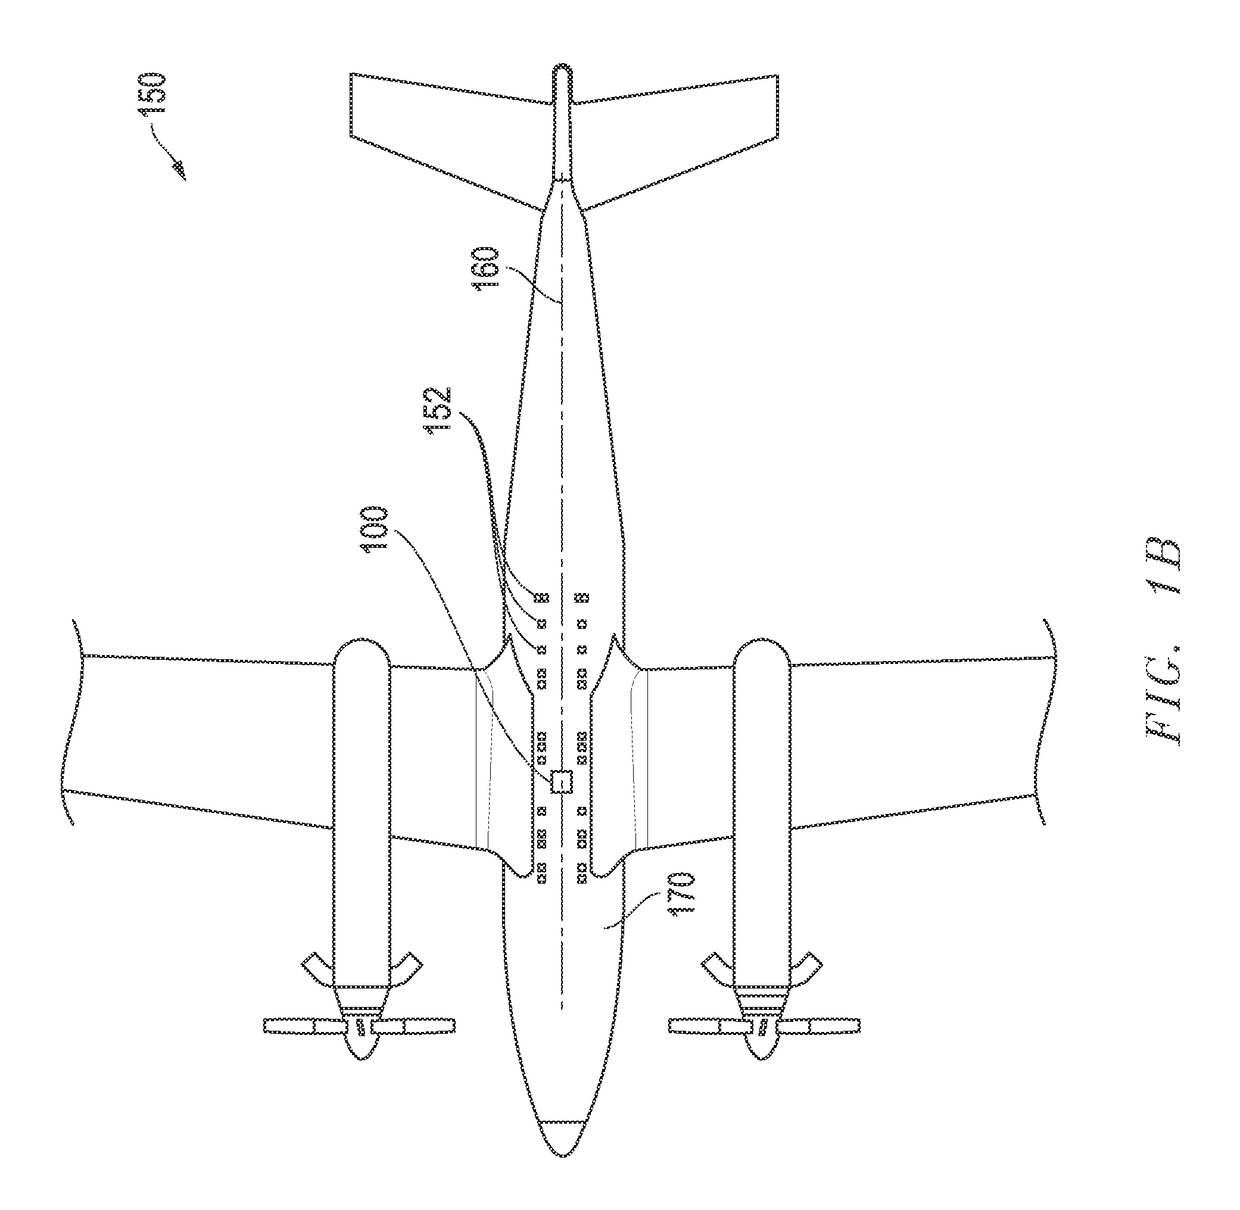 Reconfigurable payload systems (RPS) with operational load envelopes for aircraft and methods related thereto